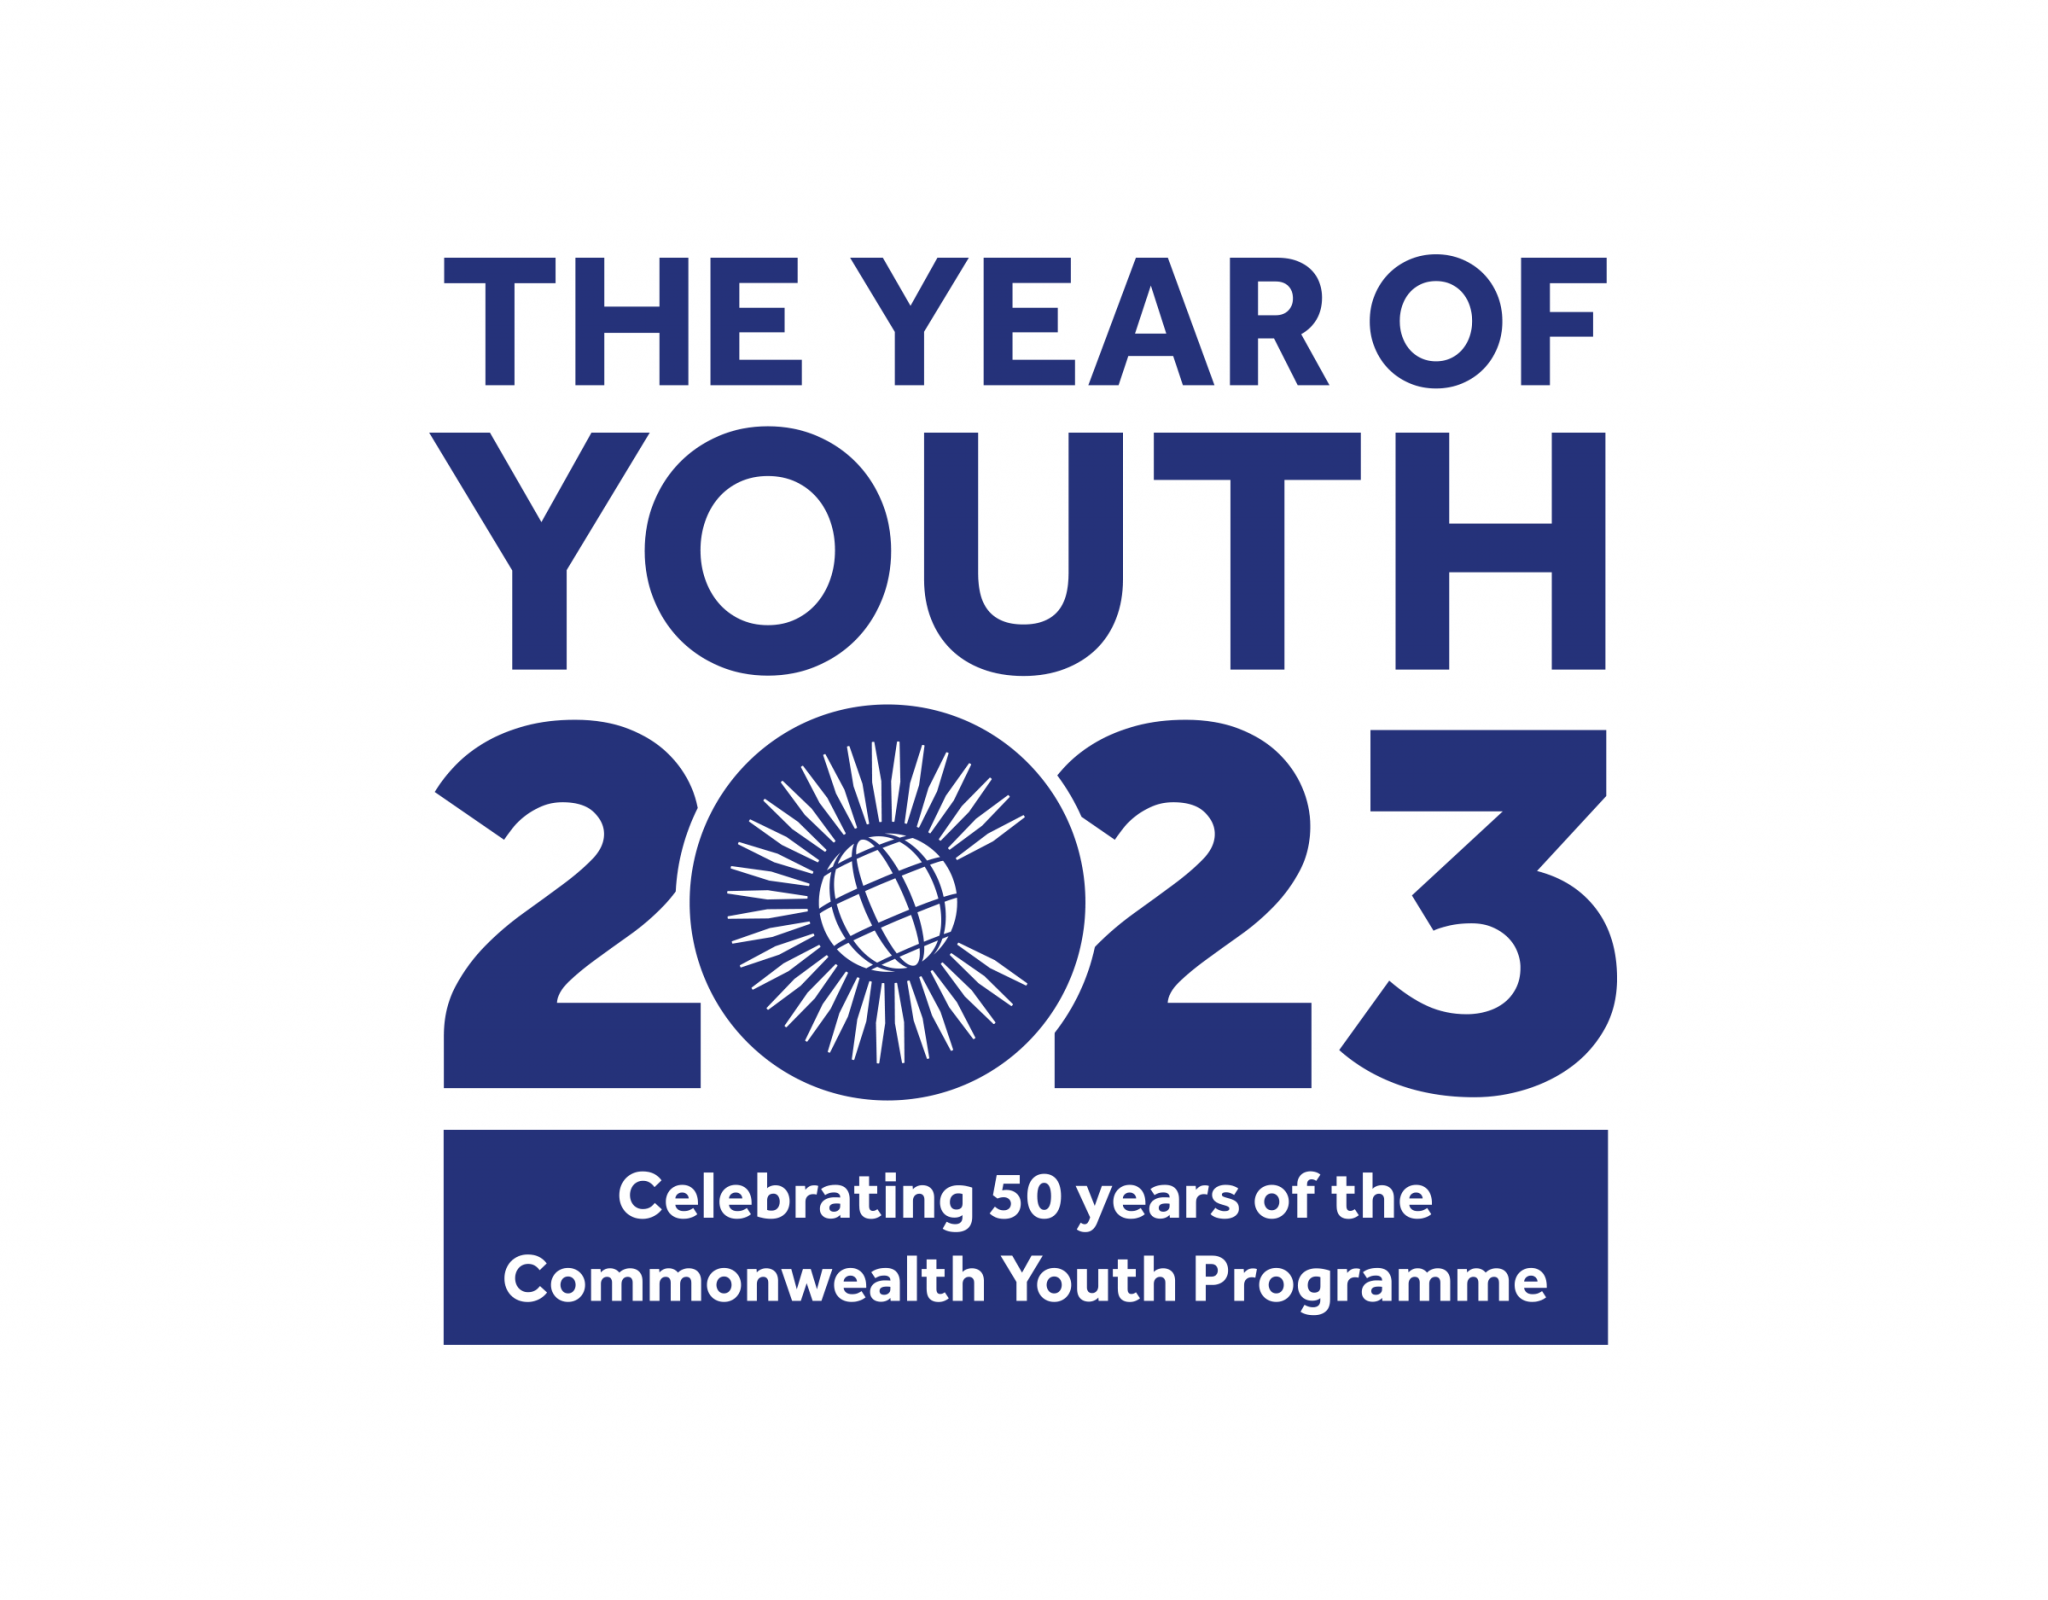  Trinbago 2023 to play leading role in Commonwealth Year of Youth